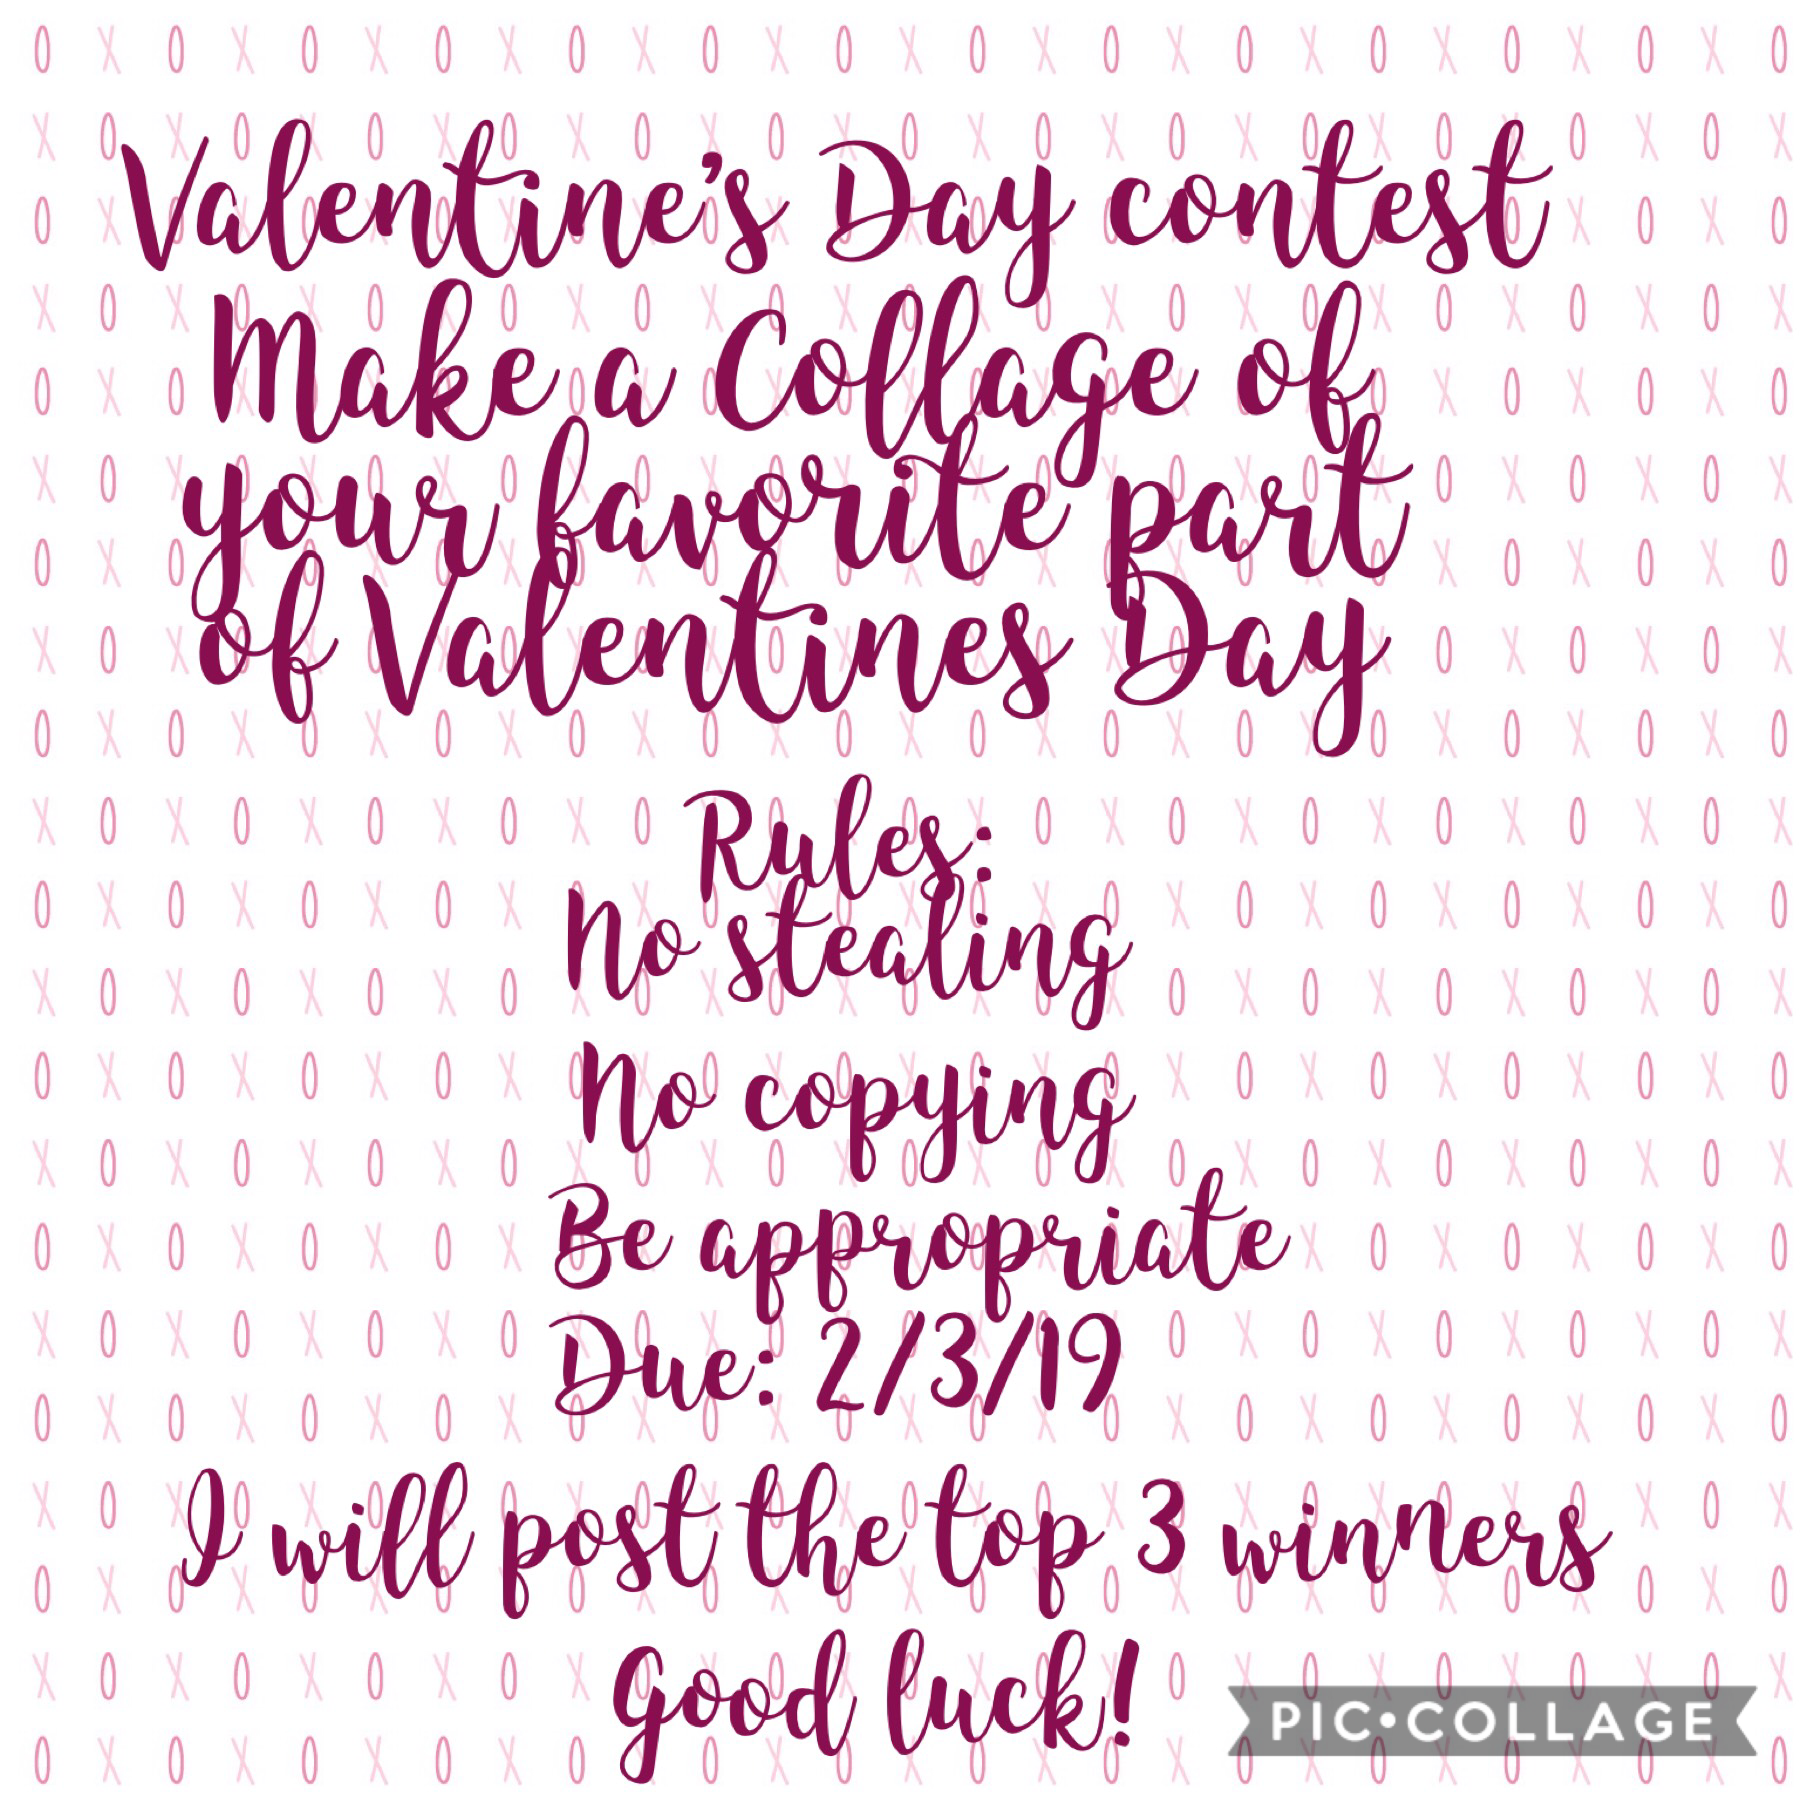 Valentines Contest! My other account is Ravenclaw_Vibes